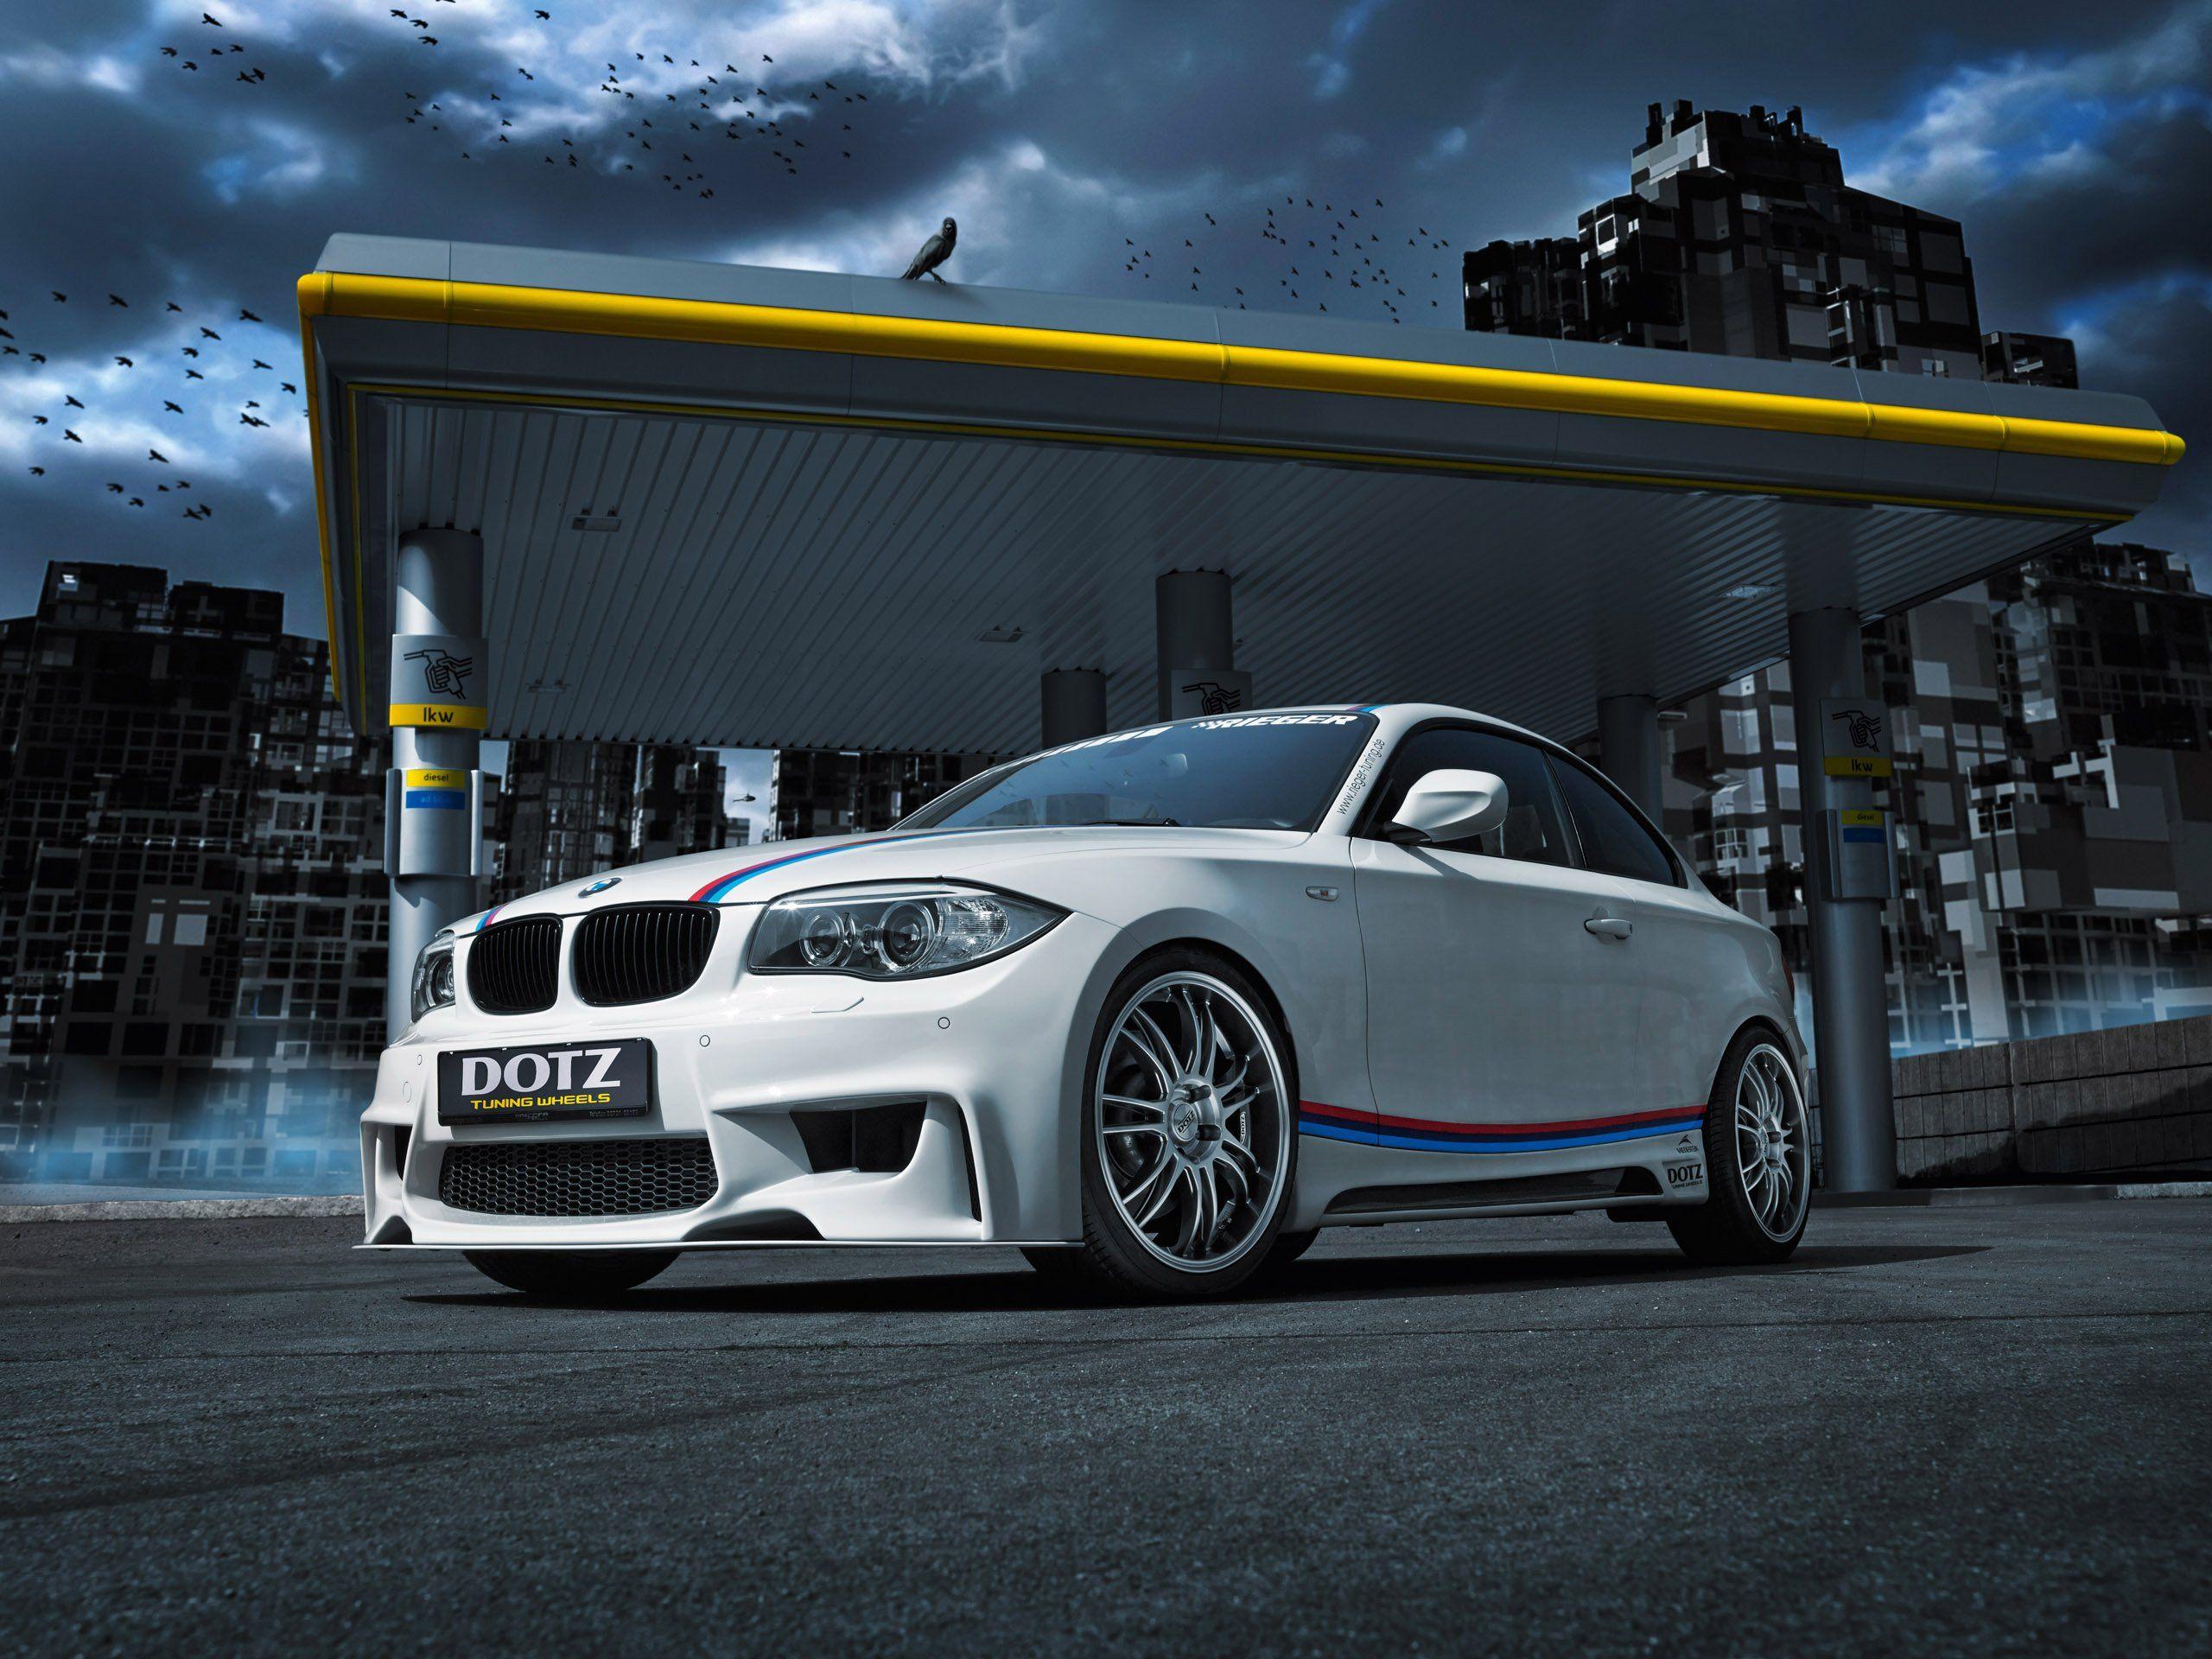 BMW 1 Series 135i Coupe Dotz Shift Tuning H Wallpaper